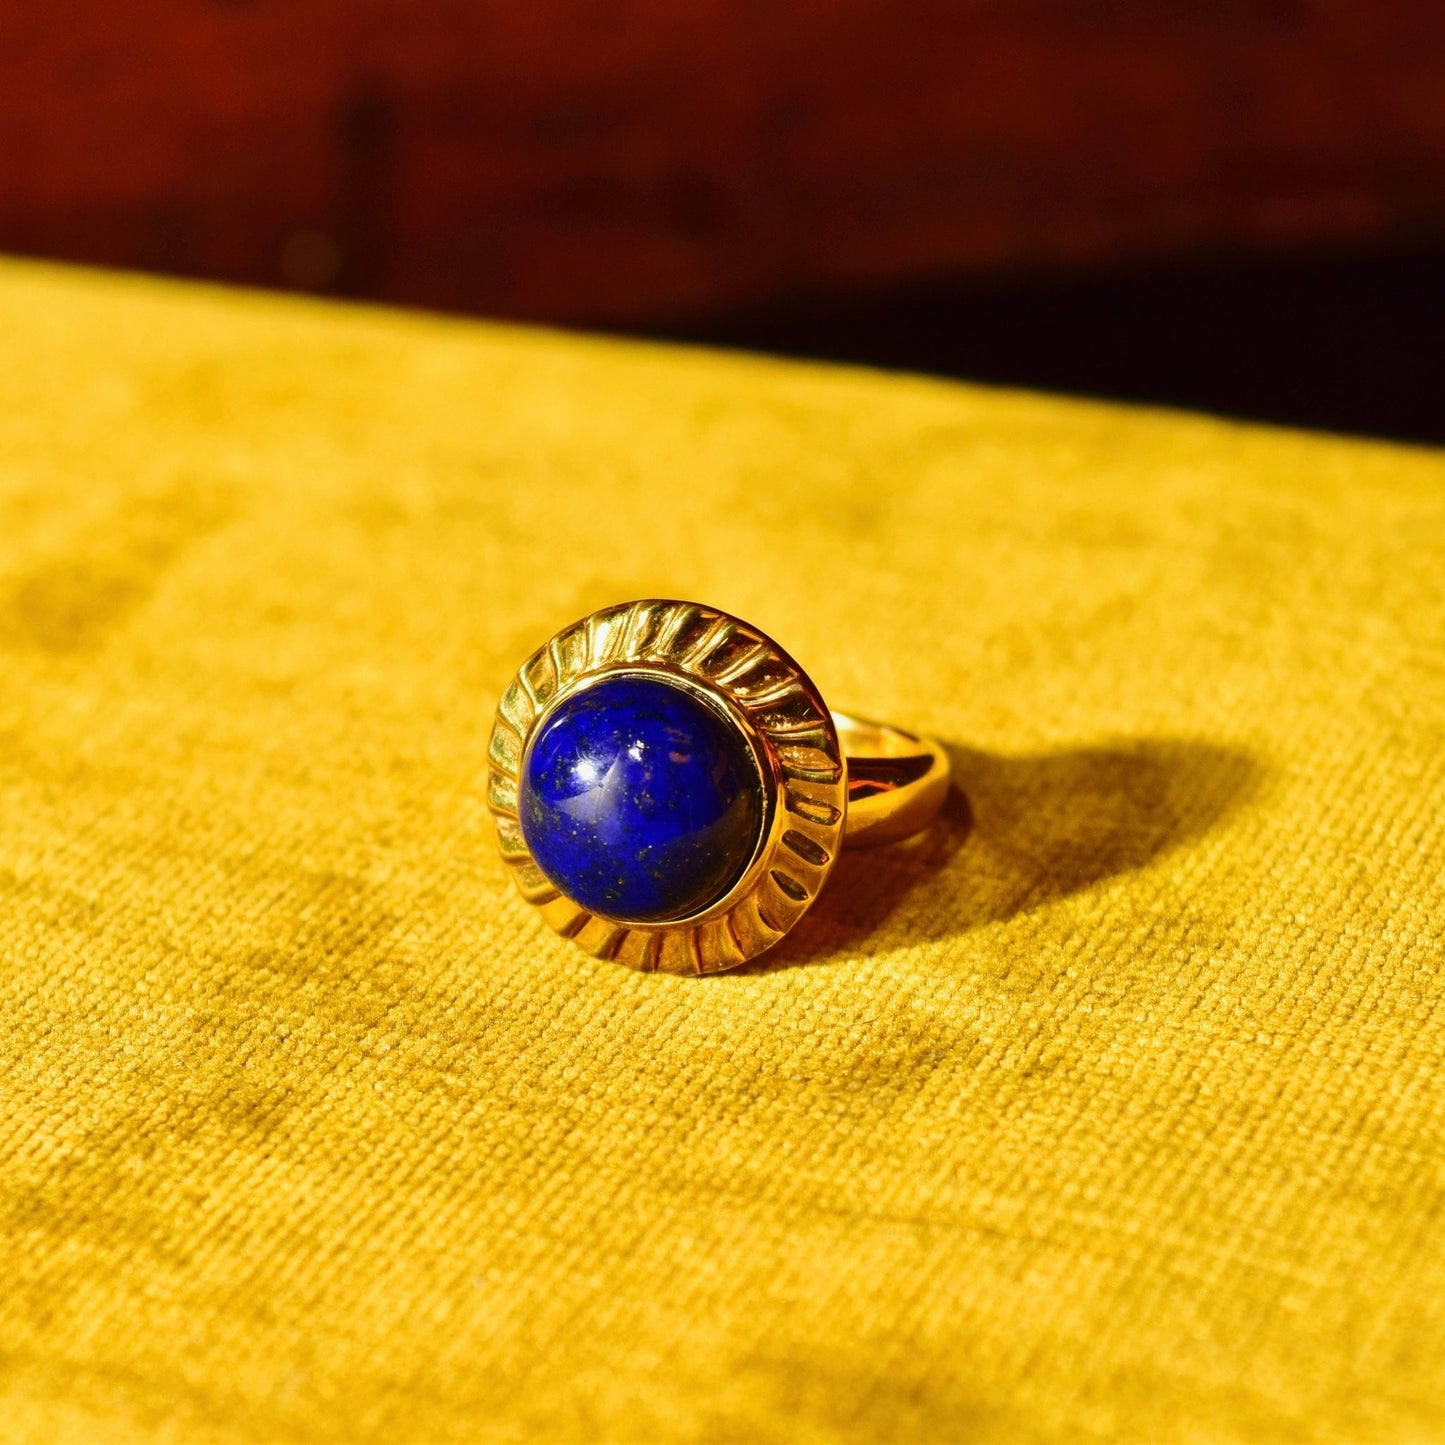 14K yellow gold ring with round blue lapis lazuli cabochon gemstone, cocktail solitaire style, size 7.5 US, against mustard yellow fabric background